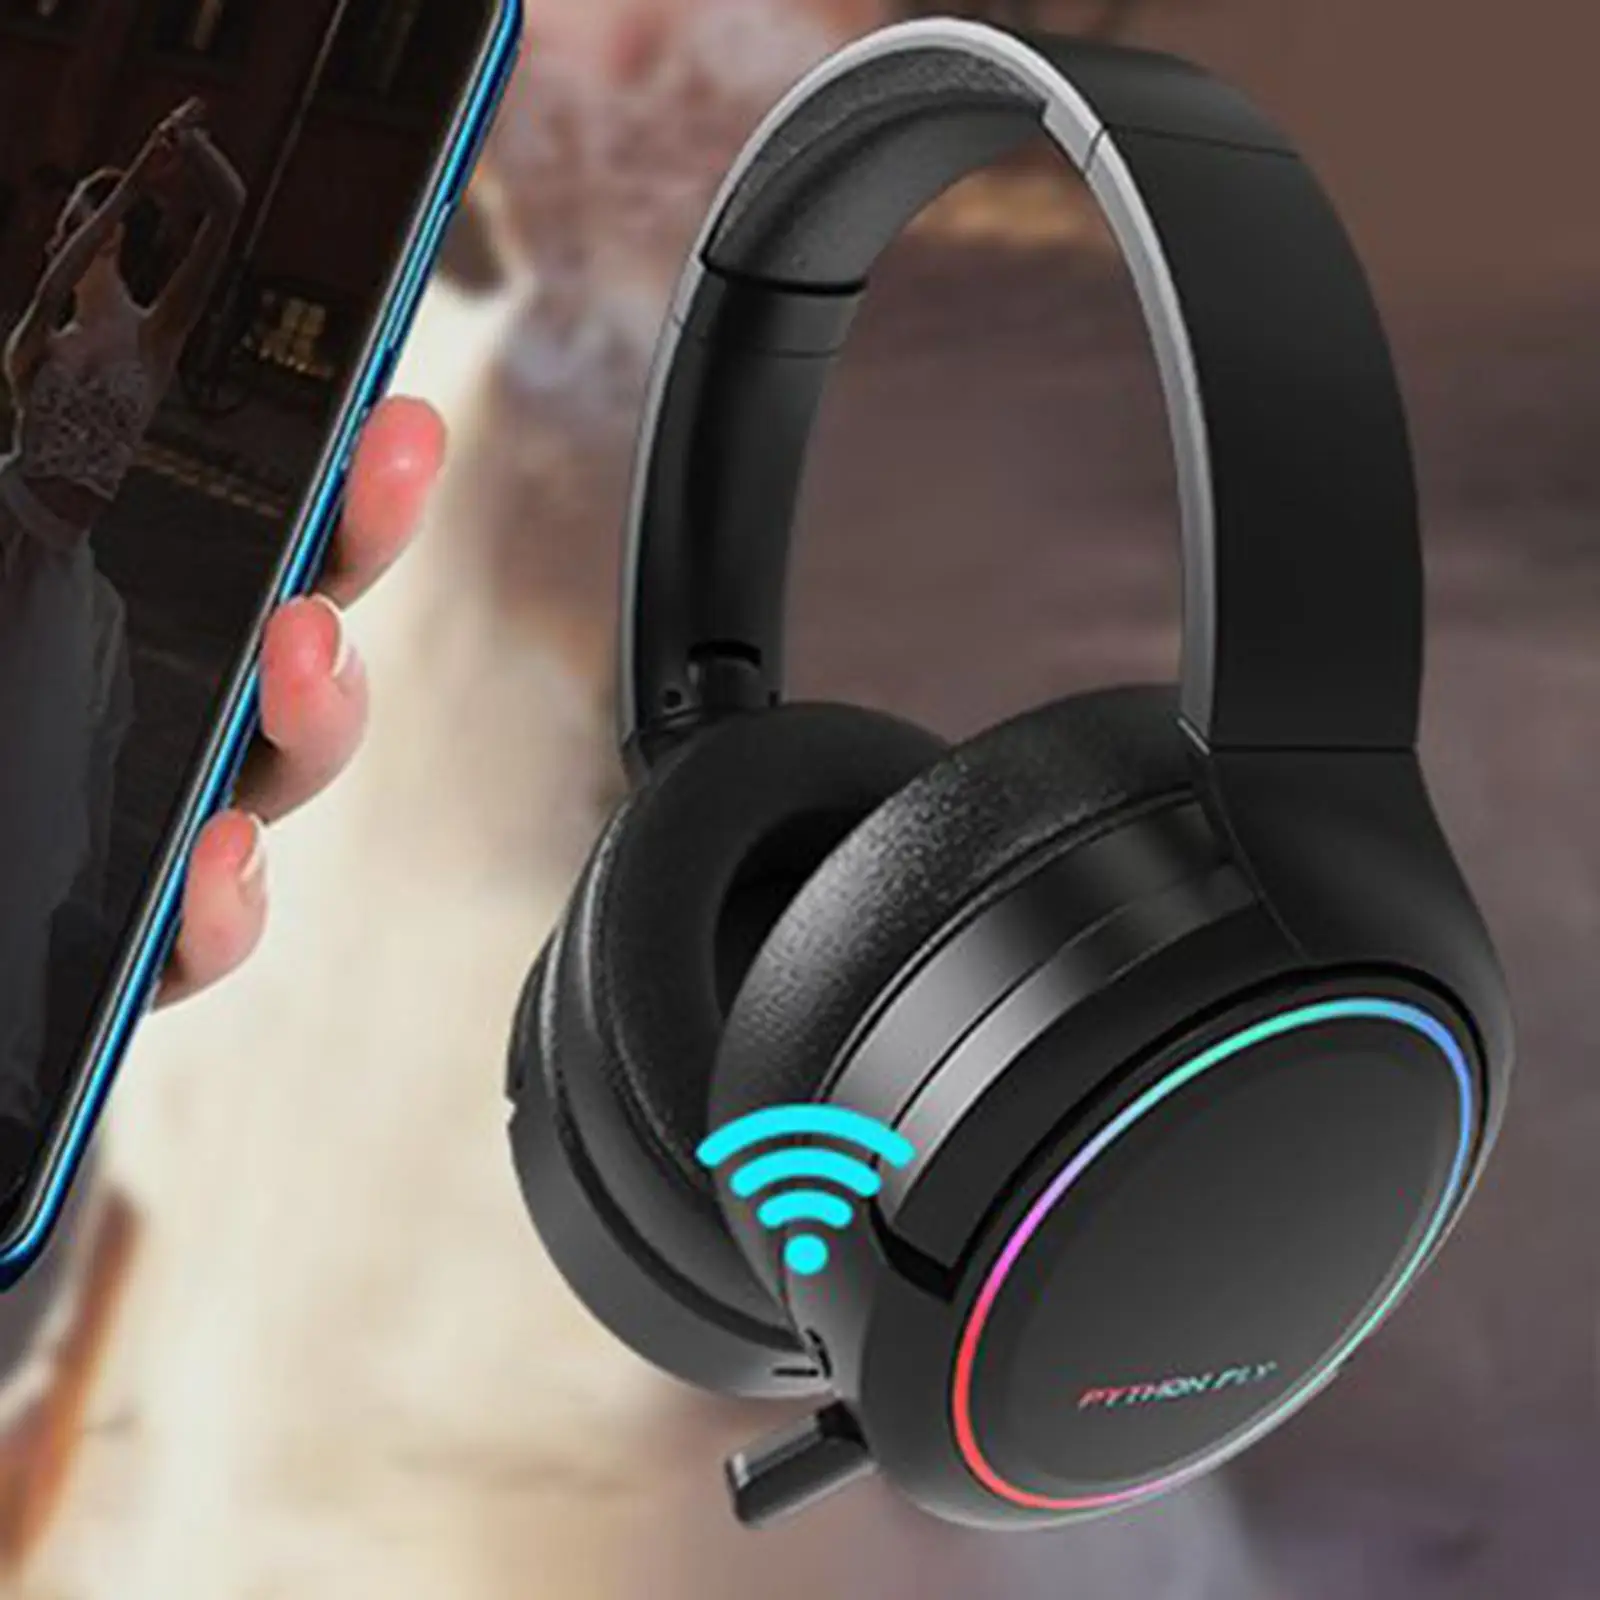 Wireless Gaming Headset with Microphone Stereo Sound Noise Canceling for PS5 Laptop